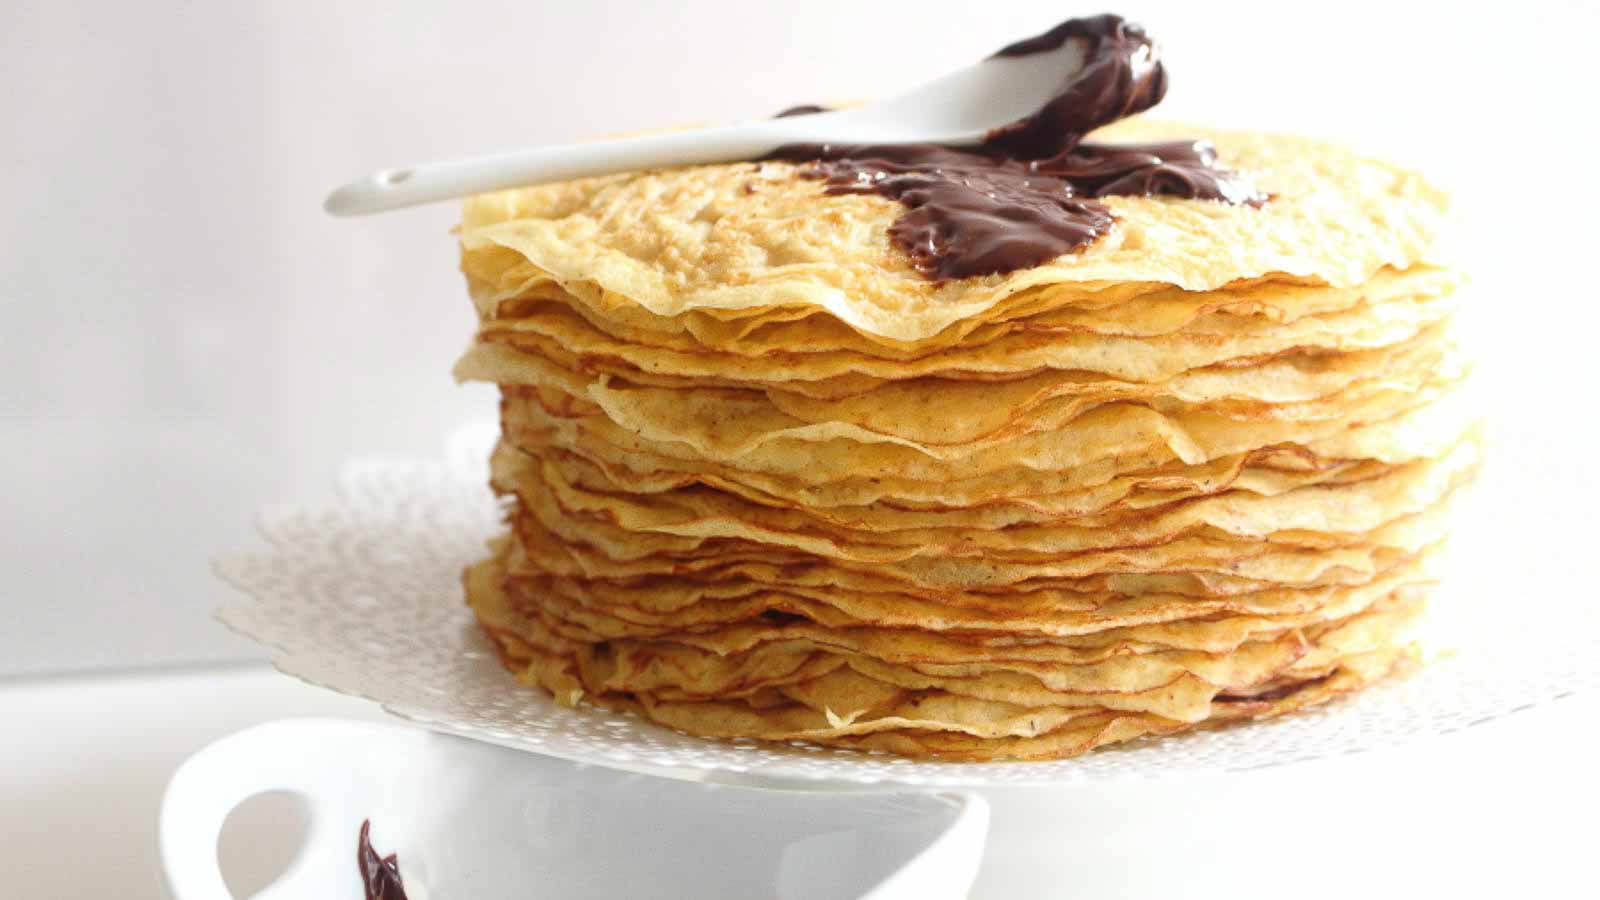 A stack of crepes with chocolate sauce on top.